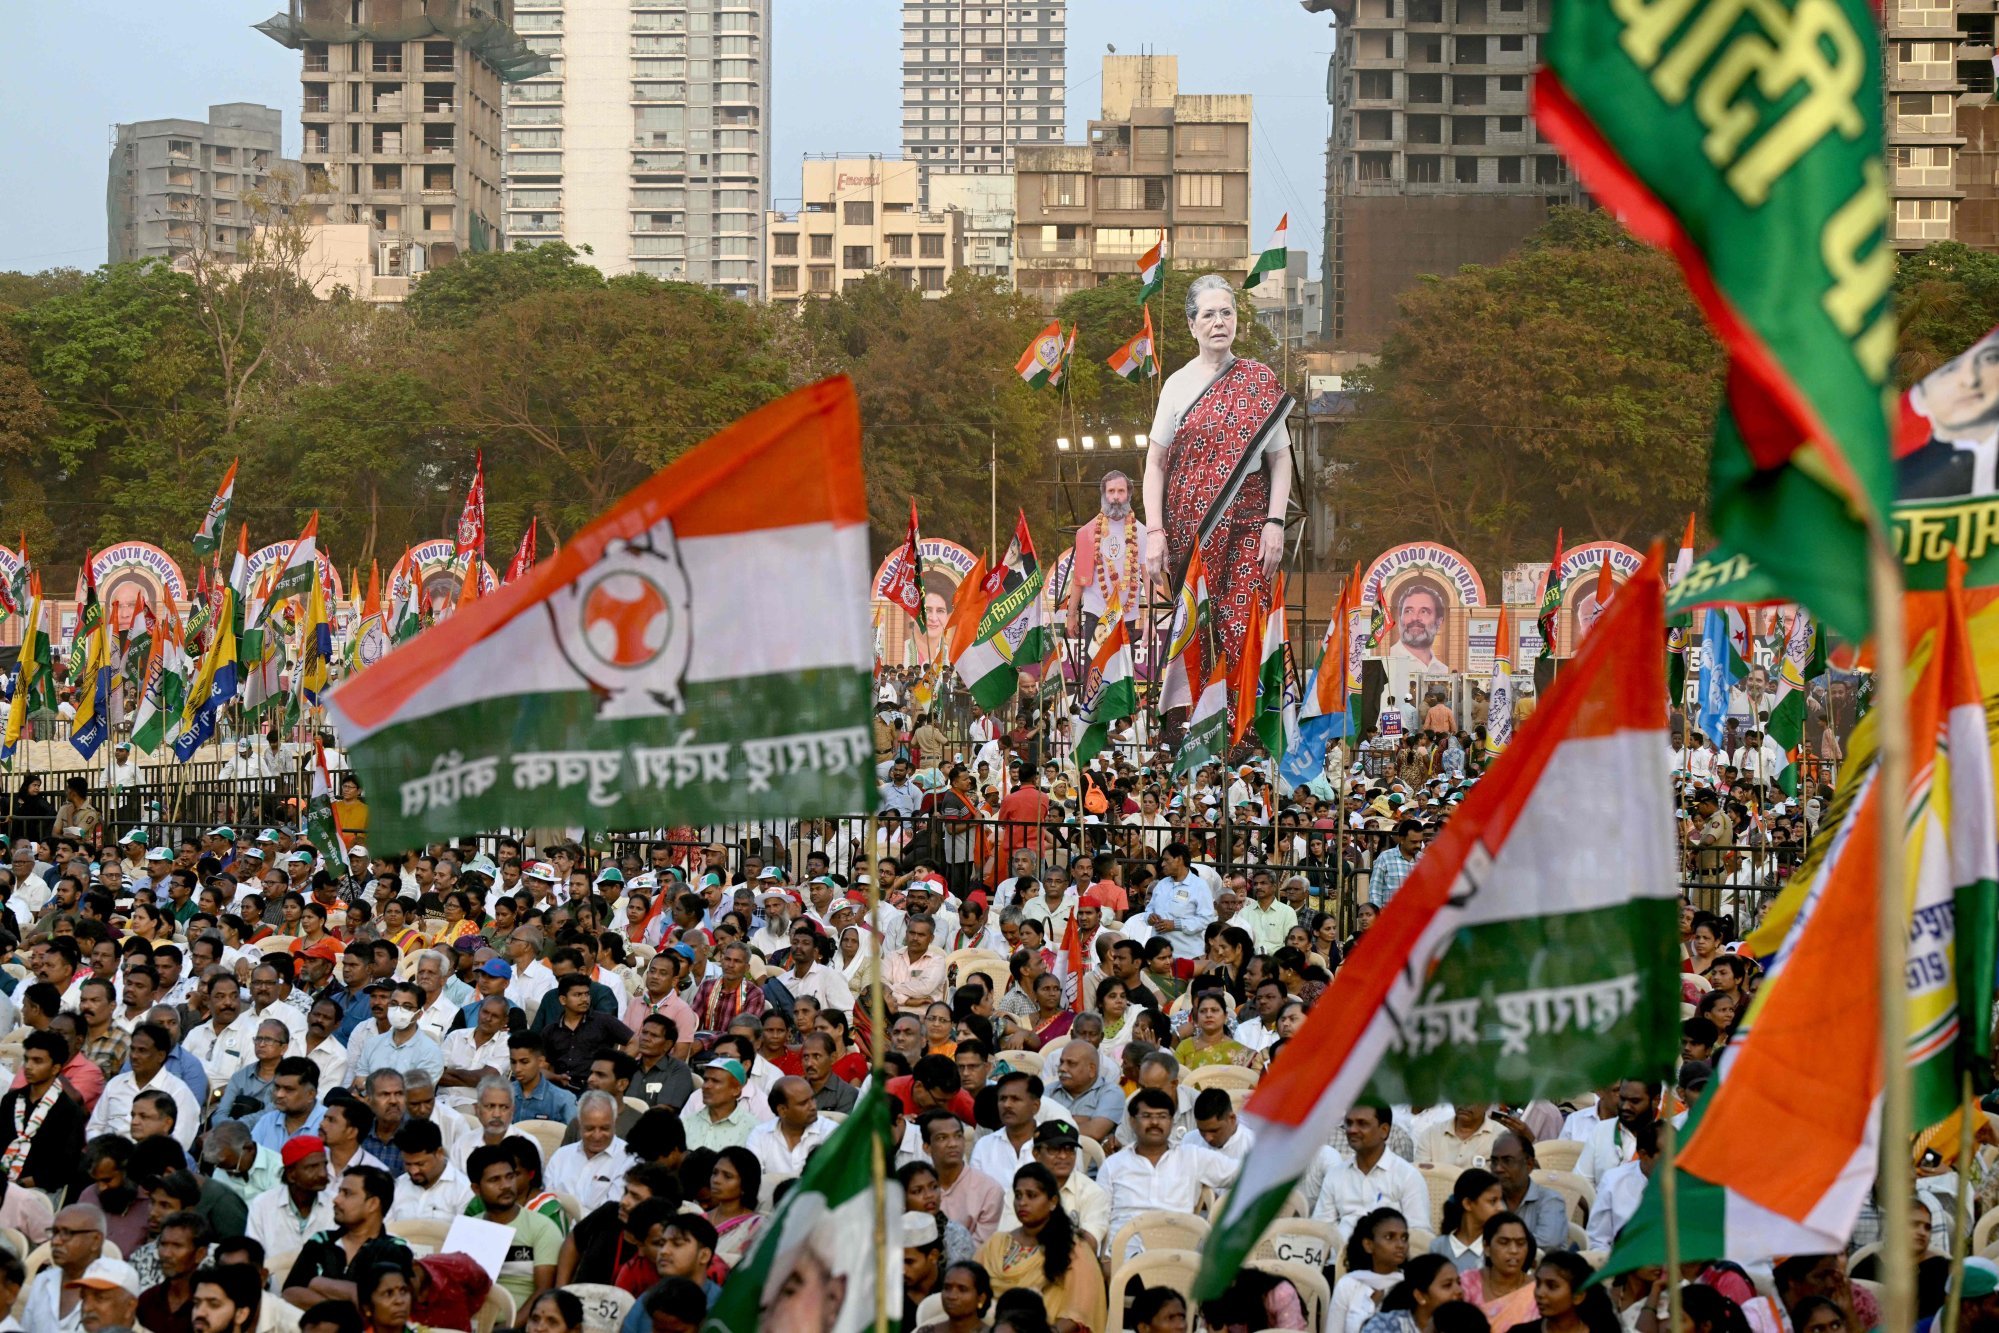 Large cutouts of India’s Congress party leaders Sonia Gandhi and her son Rahul Gandhi are carried by supporters during a campaign rally in Mumbai on March 17. Photo: AFP